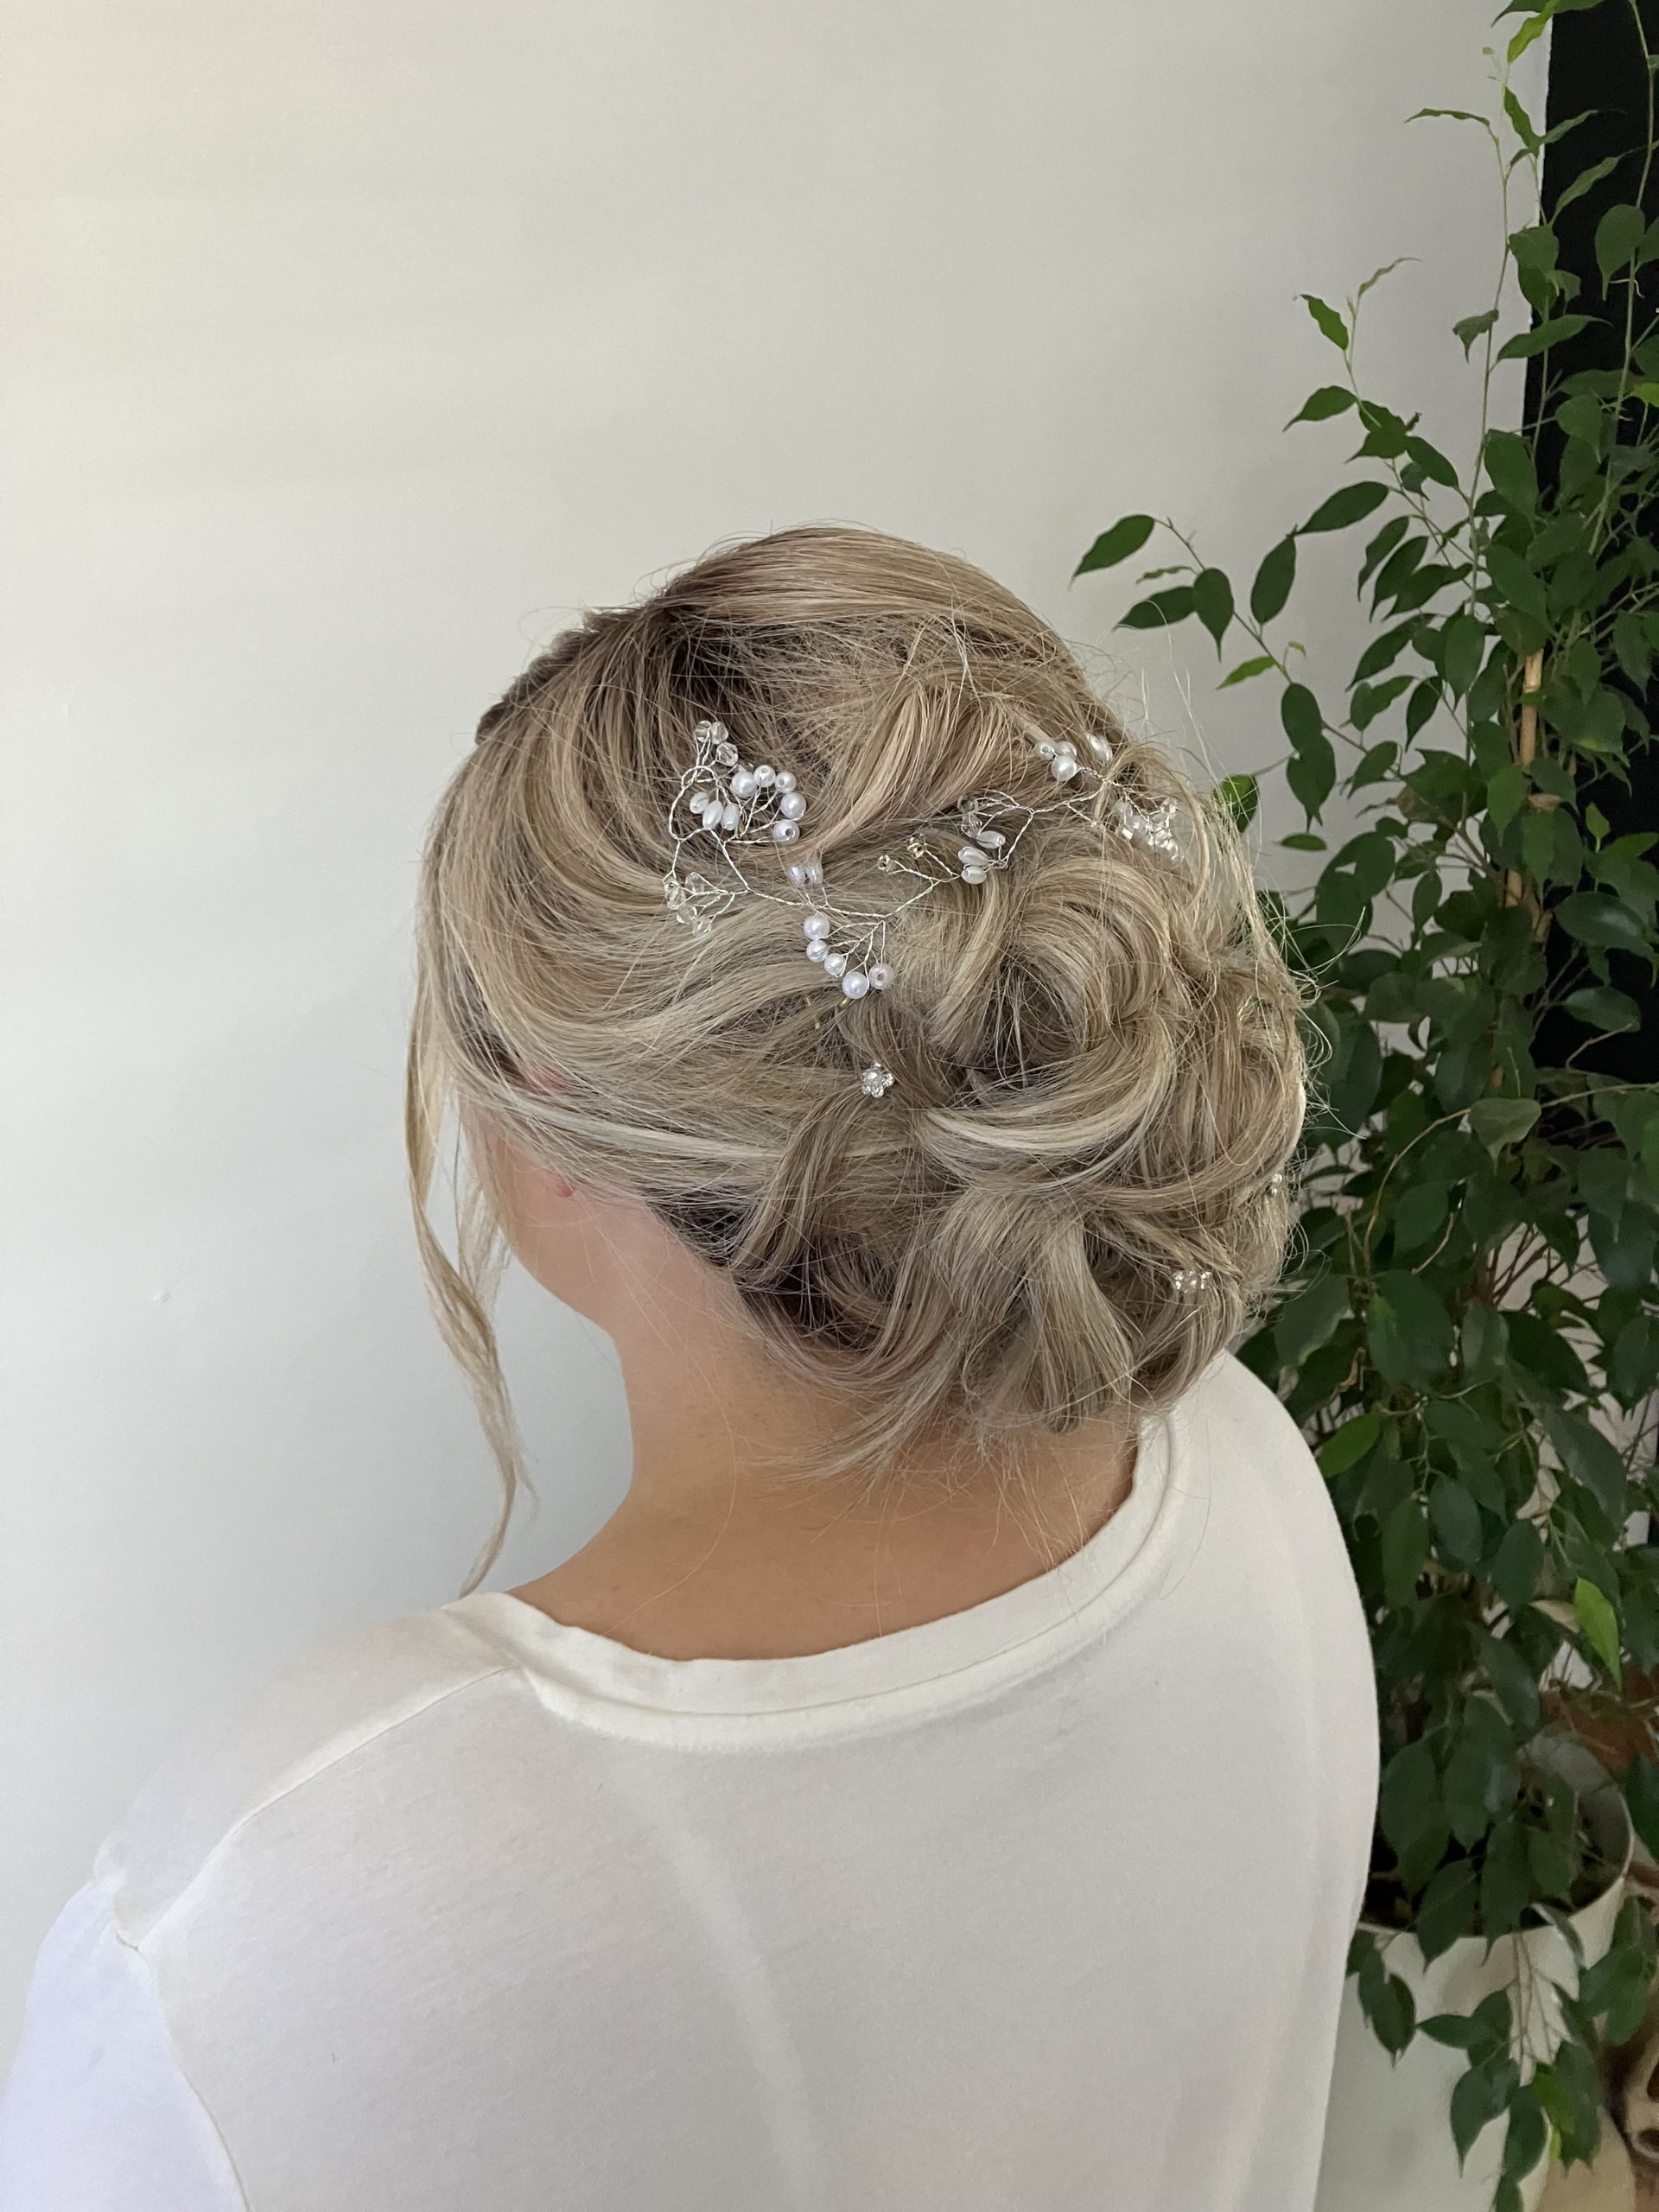 You are currently viewing Coiffure de Mariage …oui c’est possible!